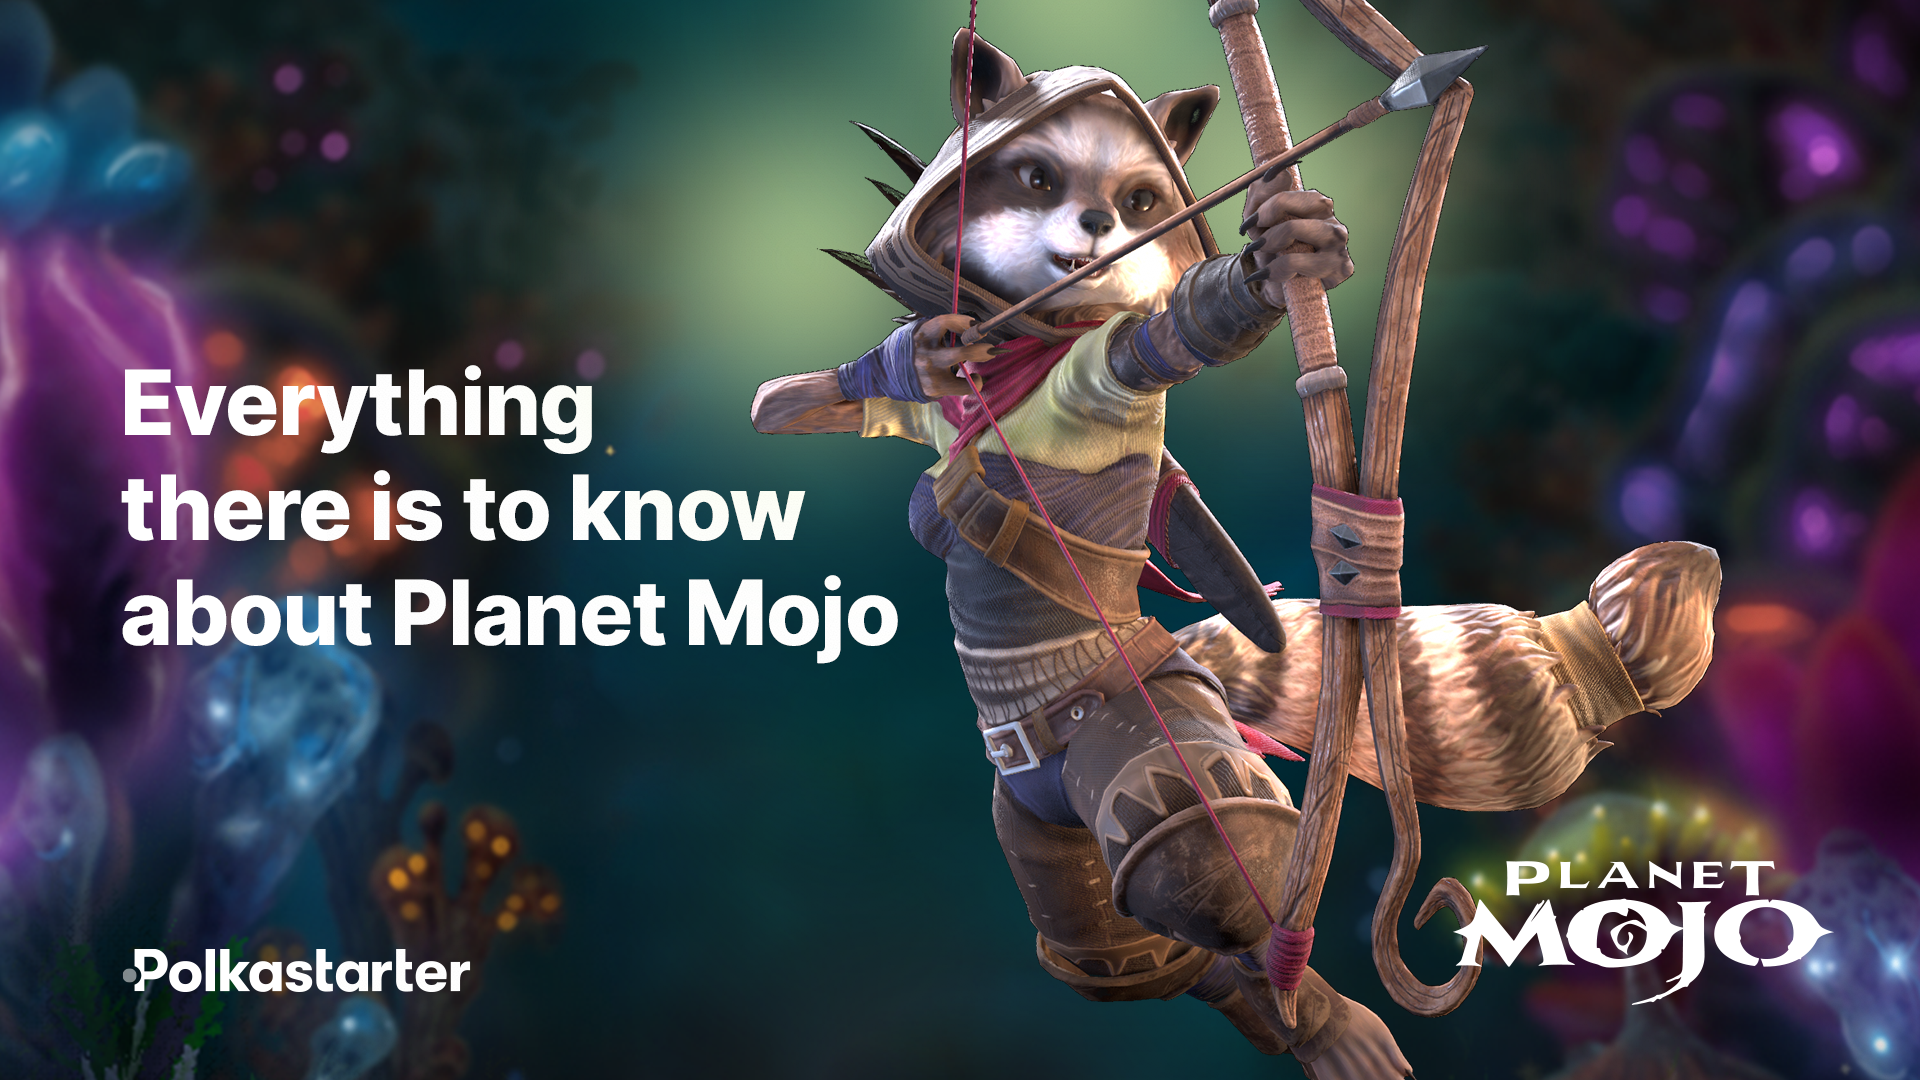 Everything there is to know about Planet Mojo